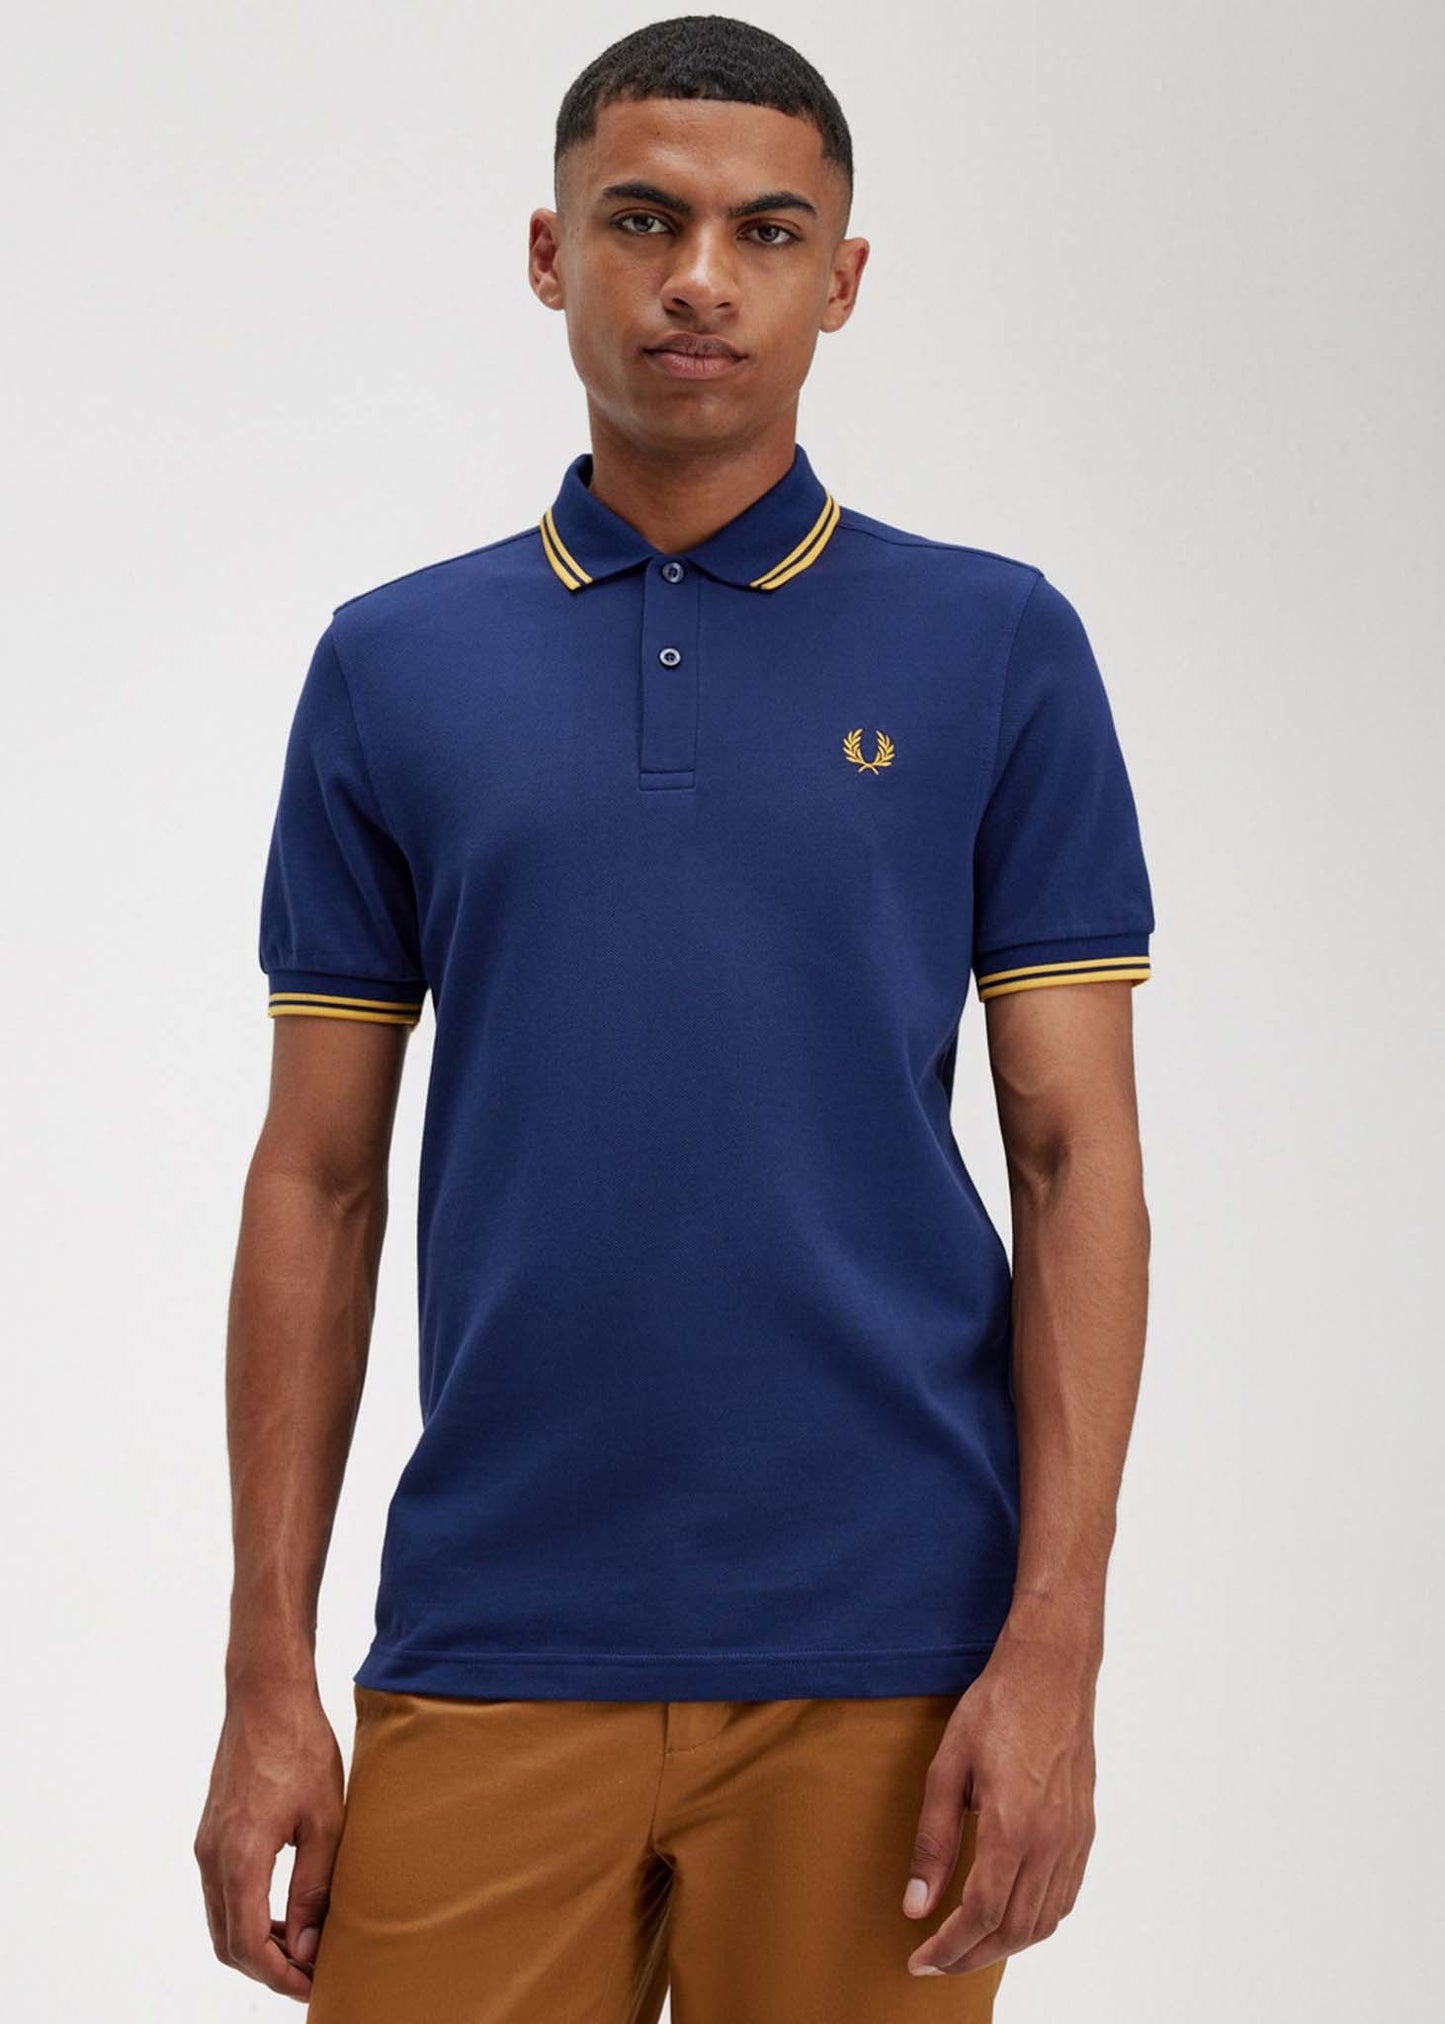 fred perry polo french navy golden hour